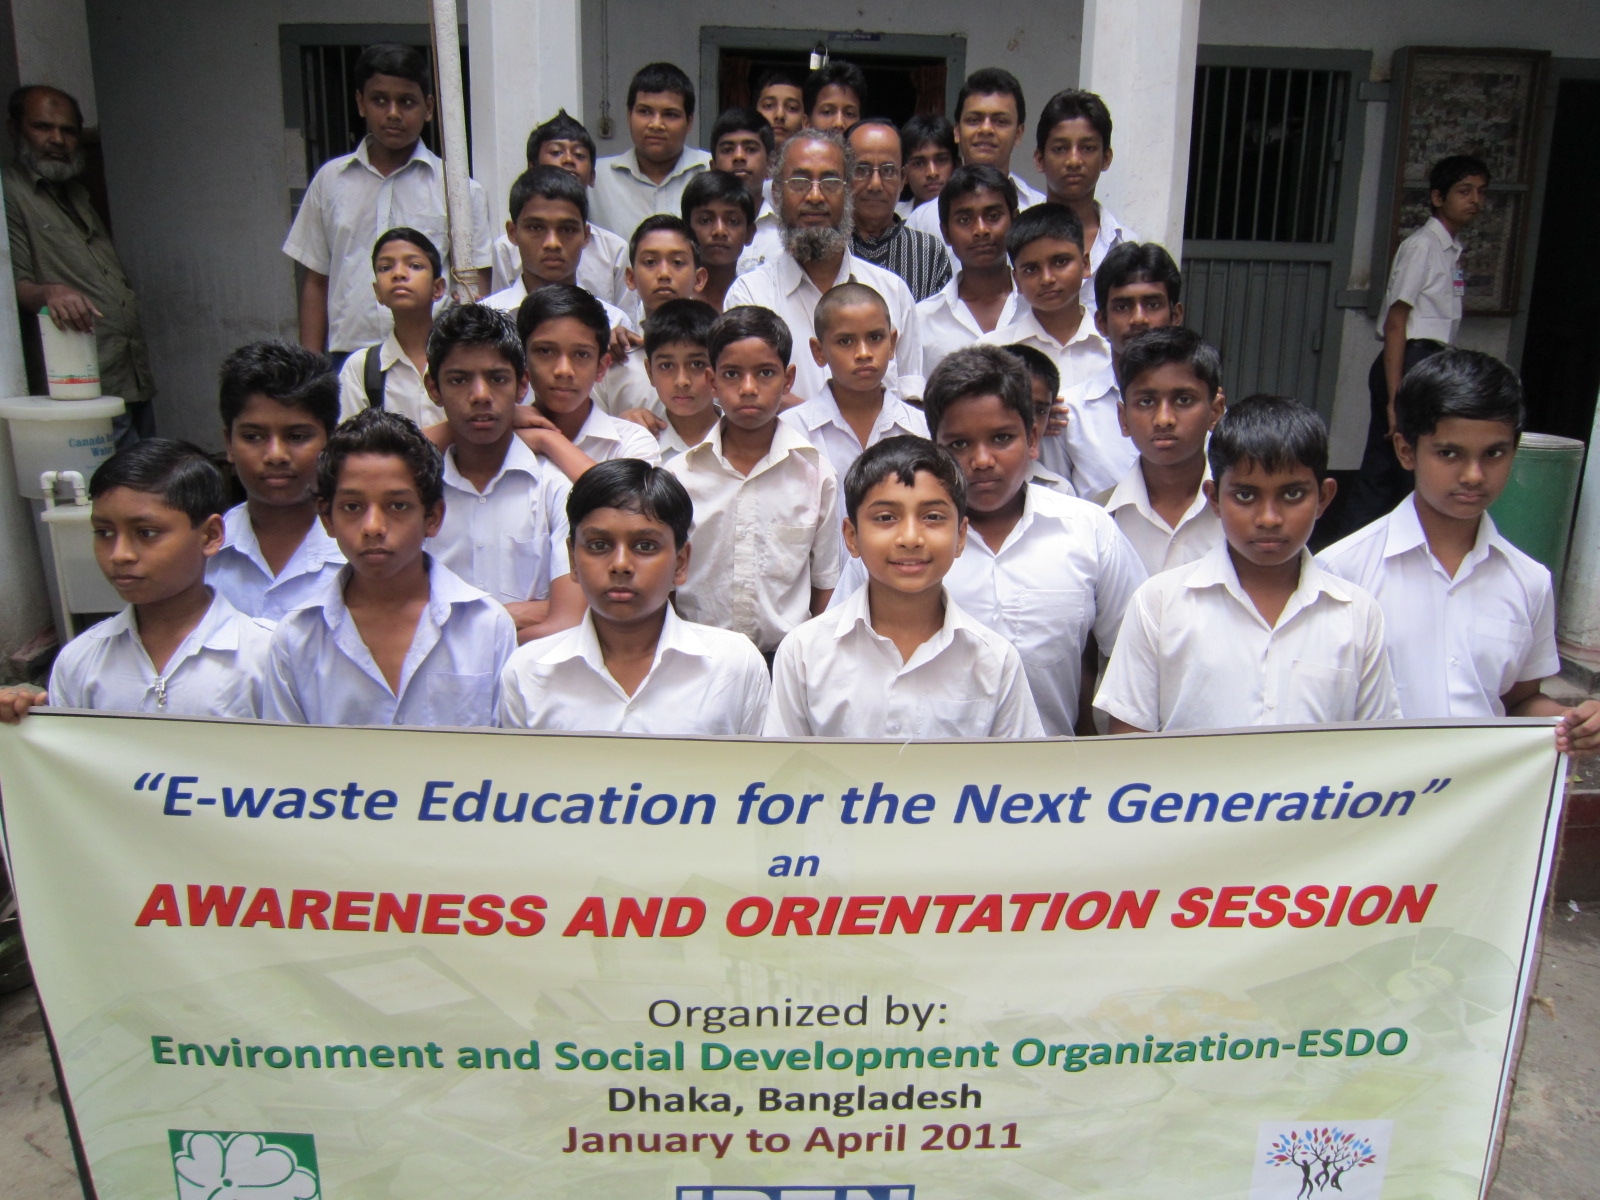 E-waste ISIP activity carried out by ESDO in Bangladesh